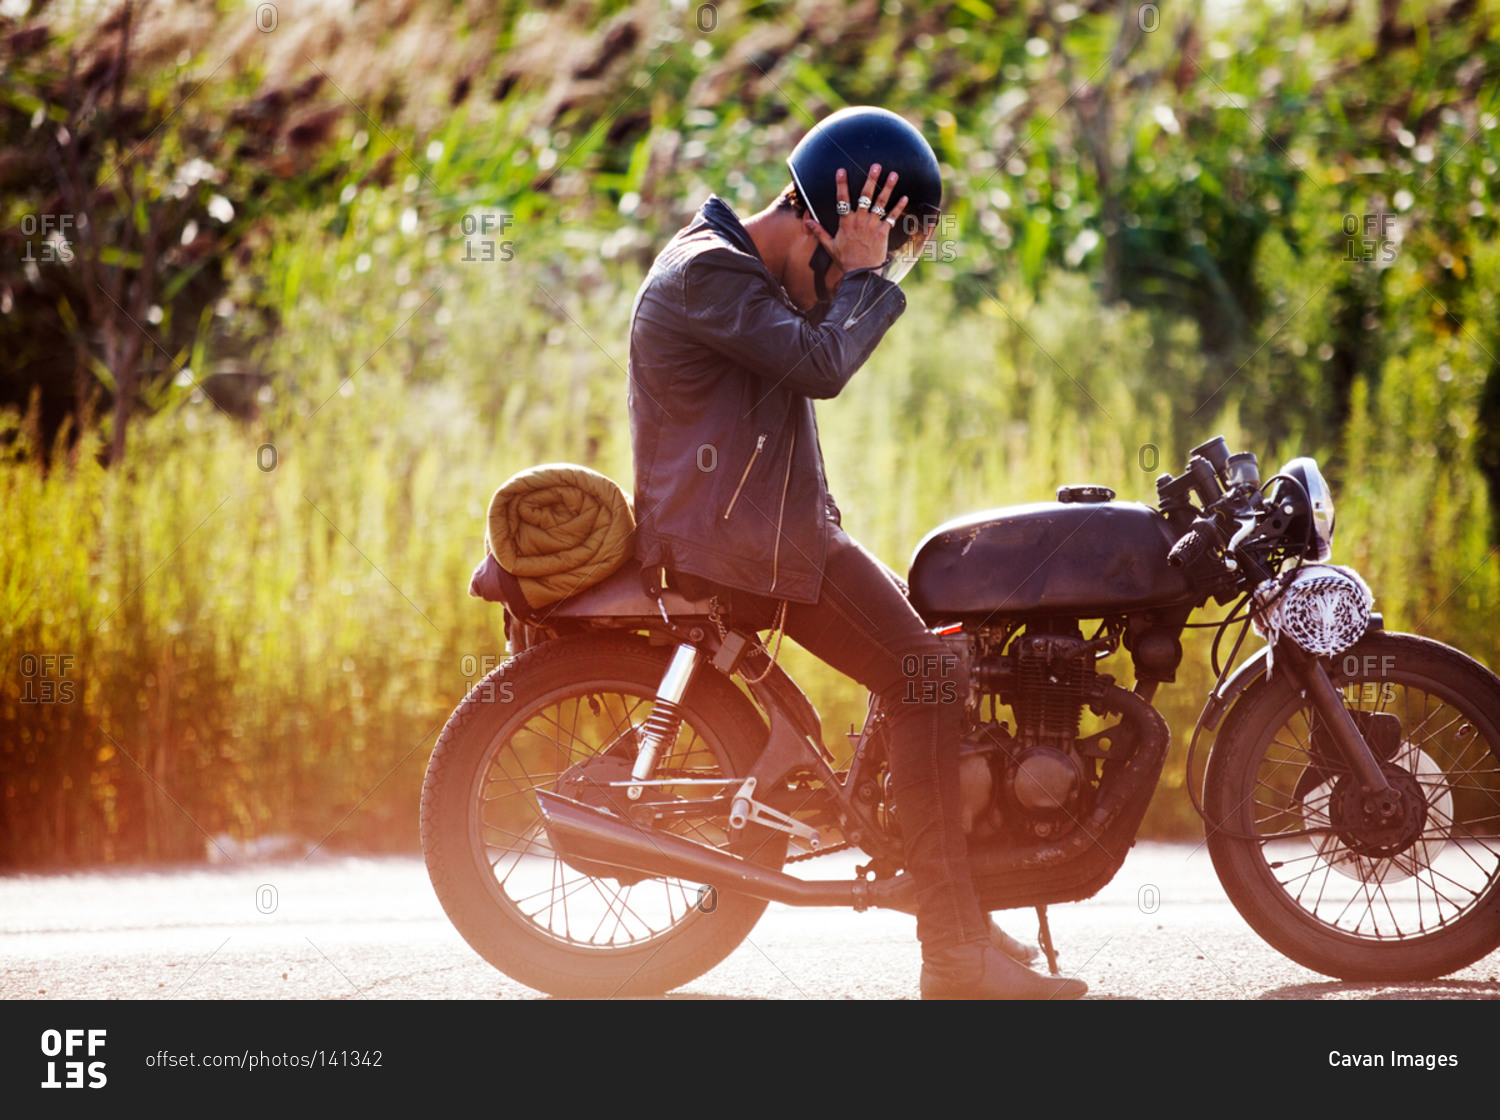 Man taking off his helmet on a motorcycle stock photo - OFFSET